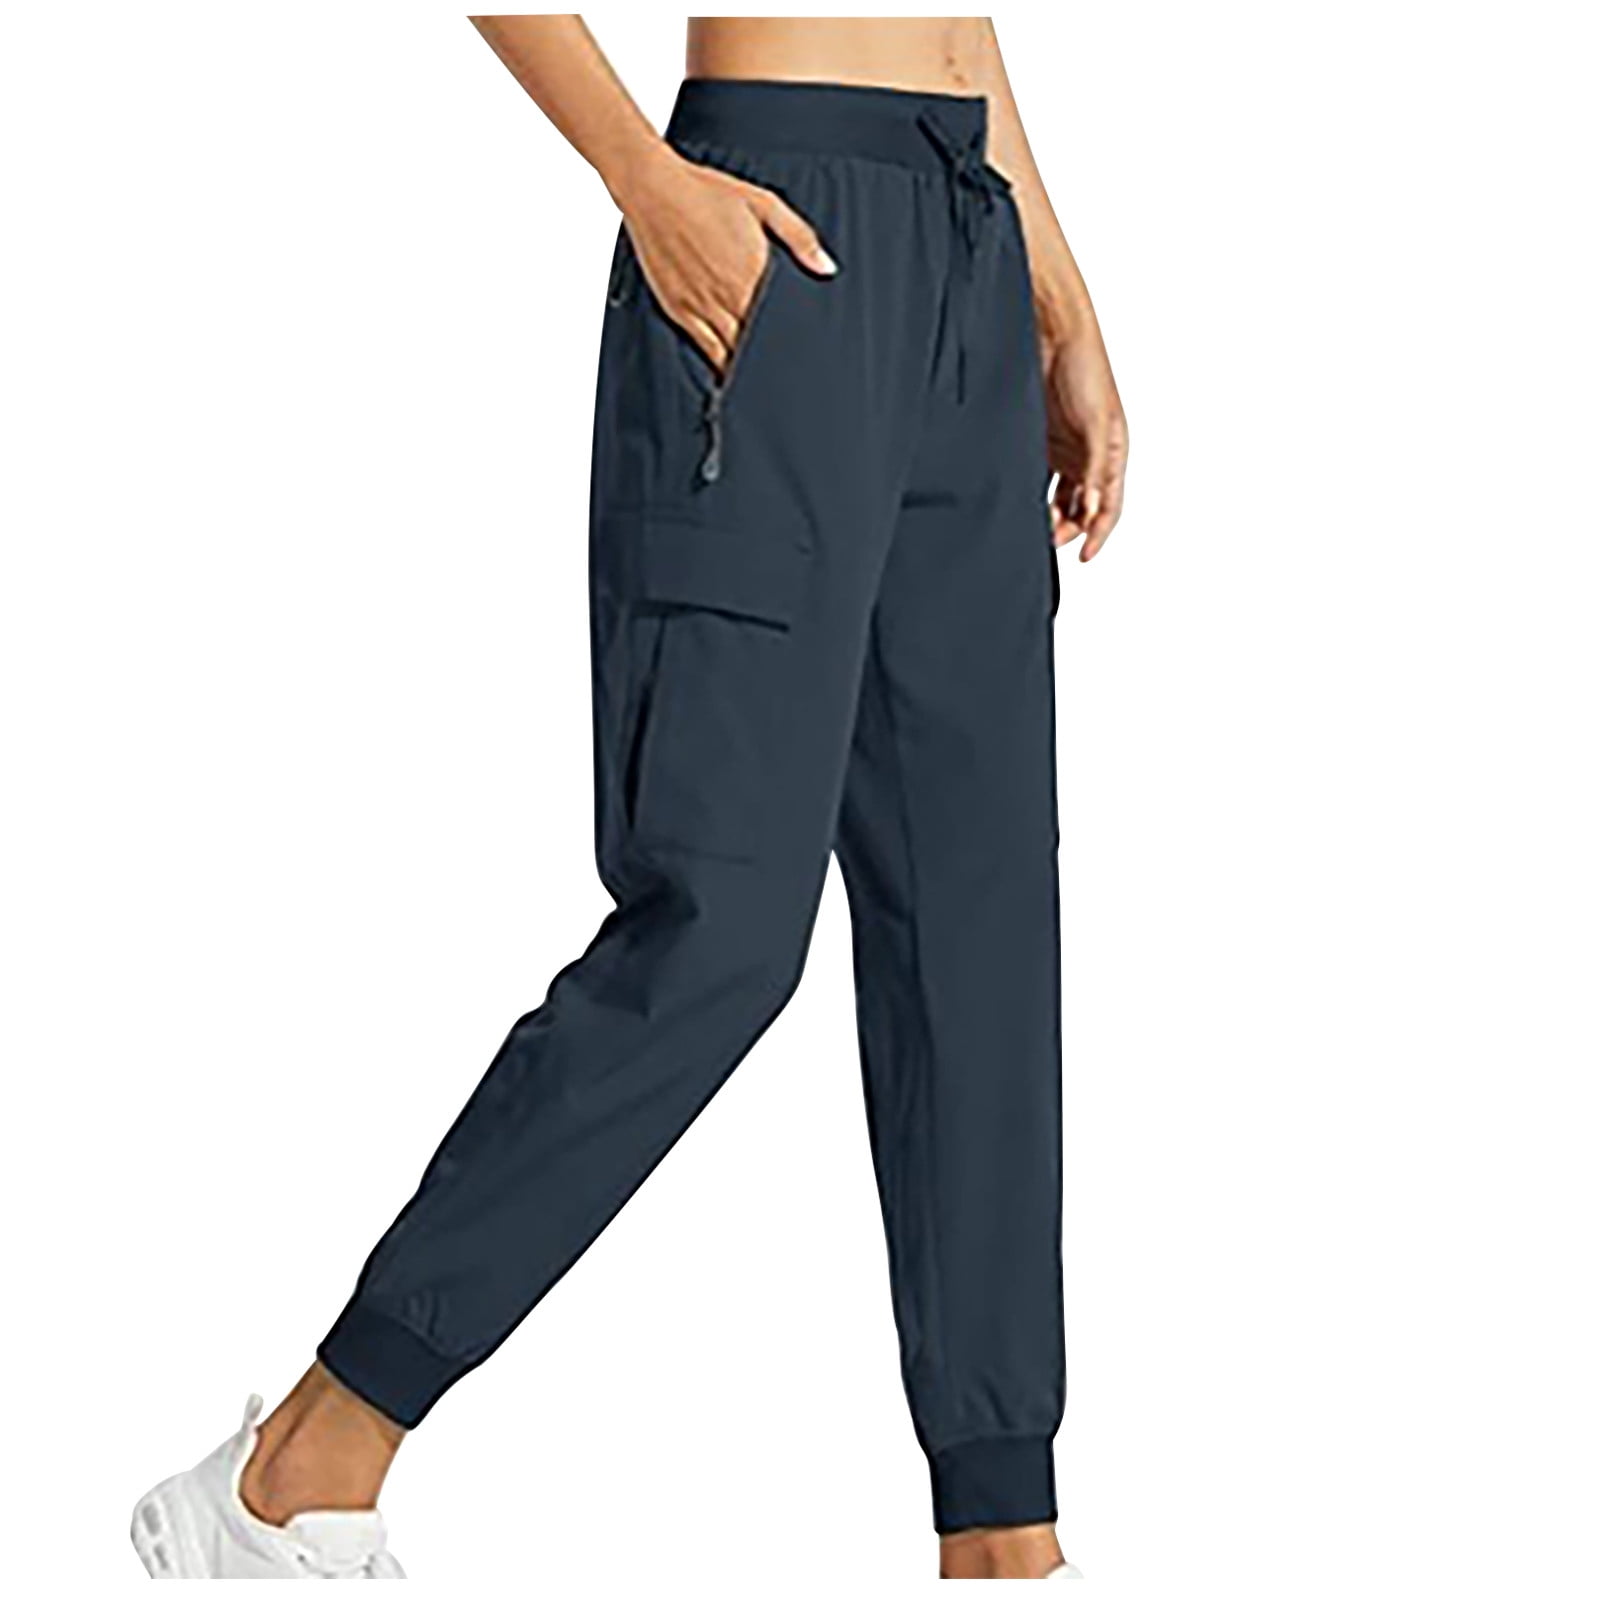 Women Jogging Pants Spandex Nylon Quick-Dry Hiking Joggers Sports Fitness  Work Wear Outdoor Tapered Sweatpants 